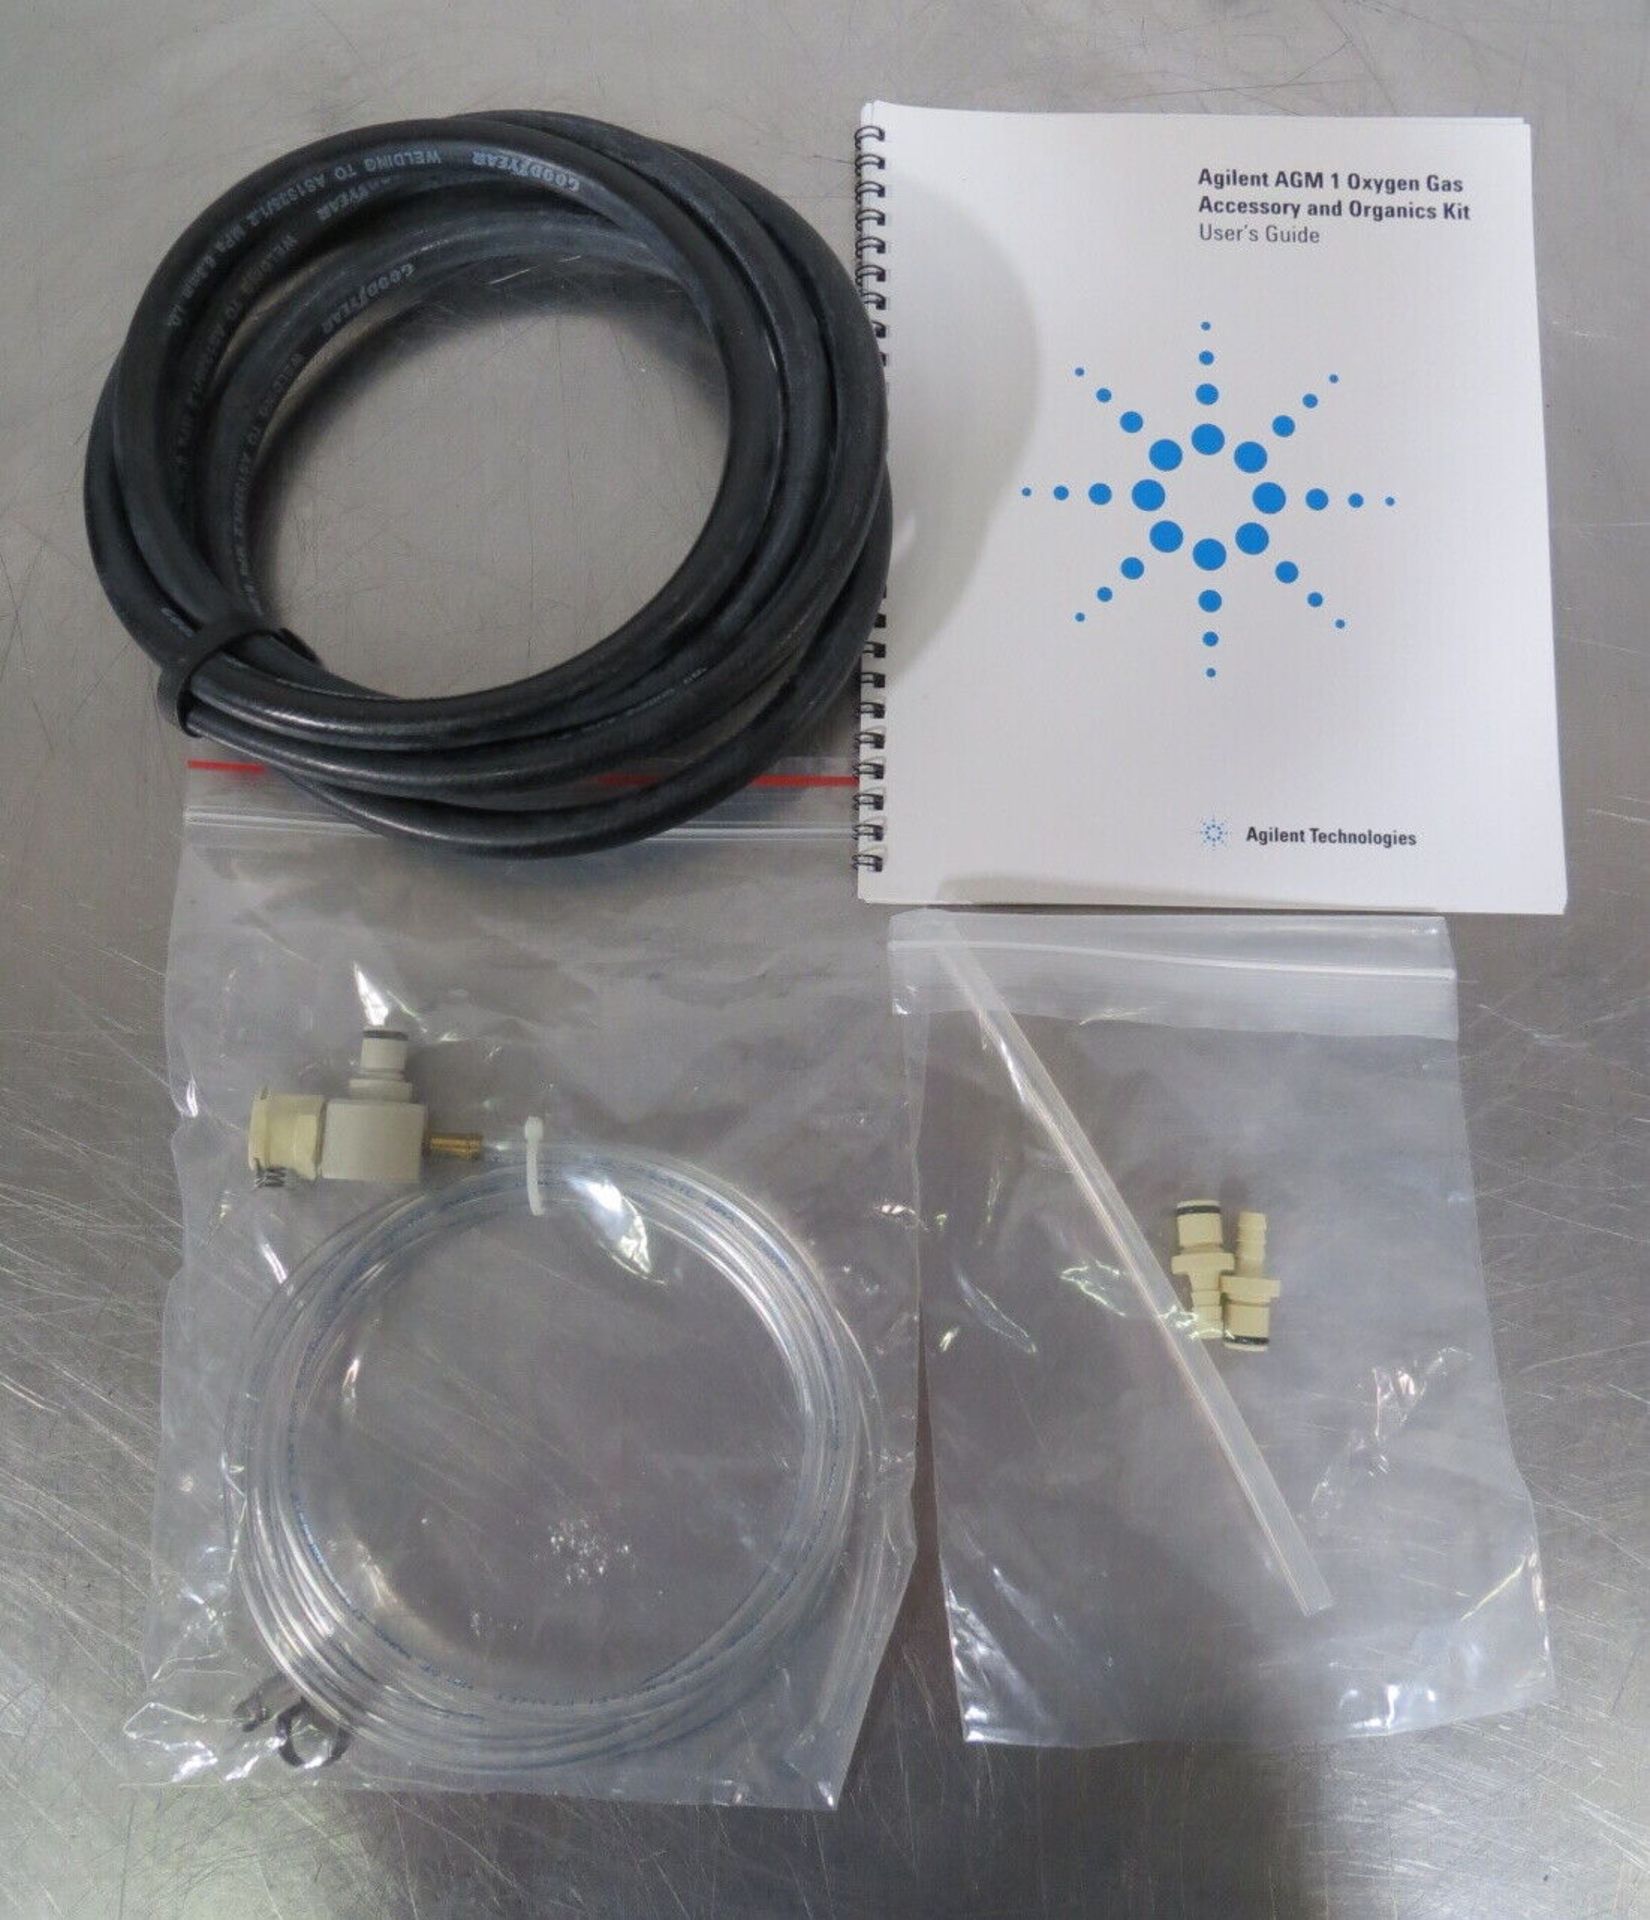 Agilent AGM1 Oxygen Gas Accessory for ICP-OES Spectrometer - Gilroy - Image 4 of 6